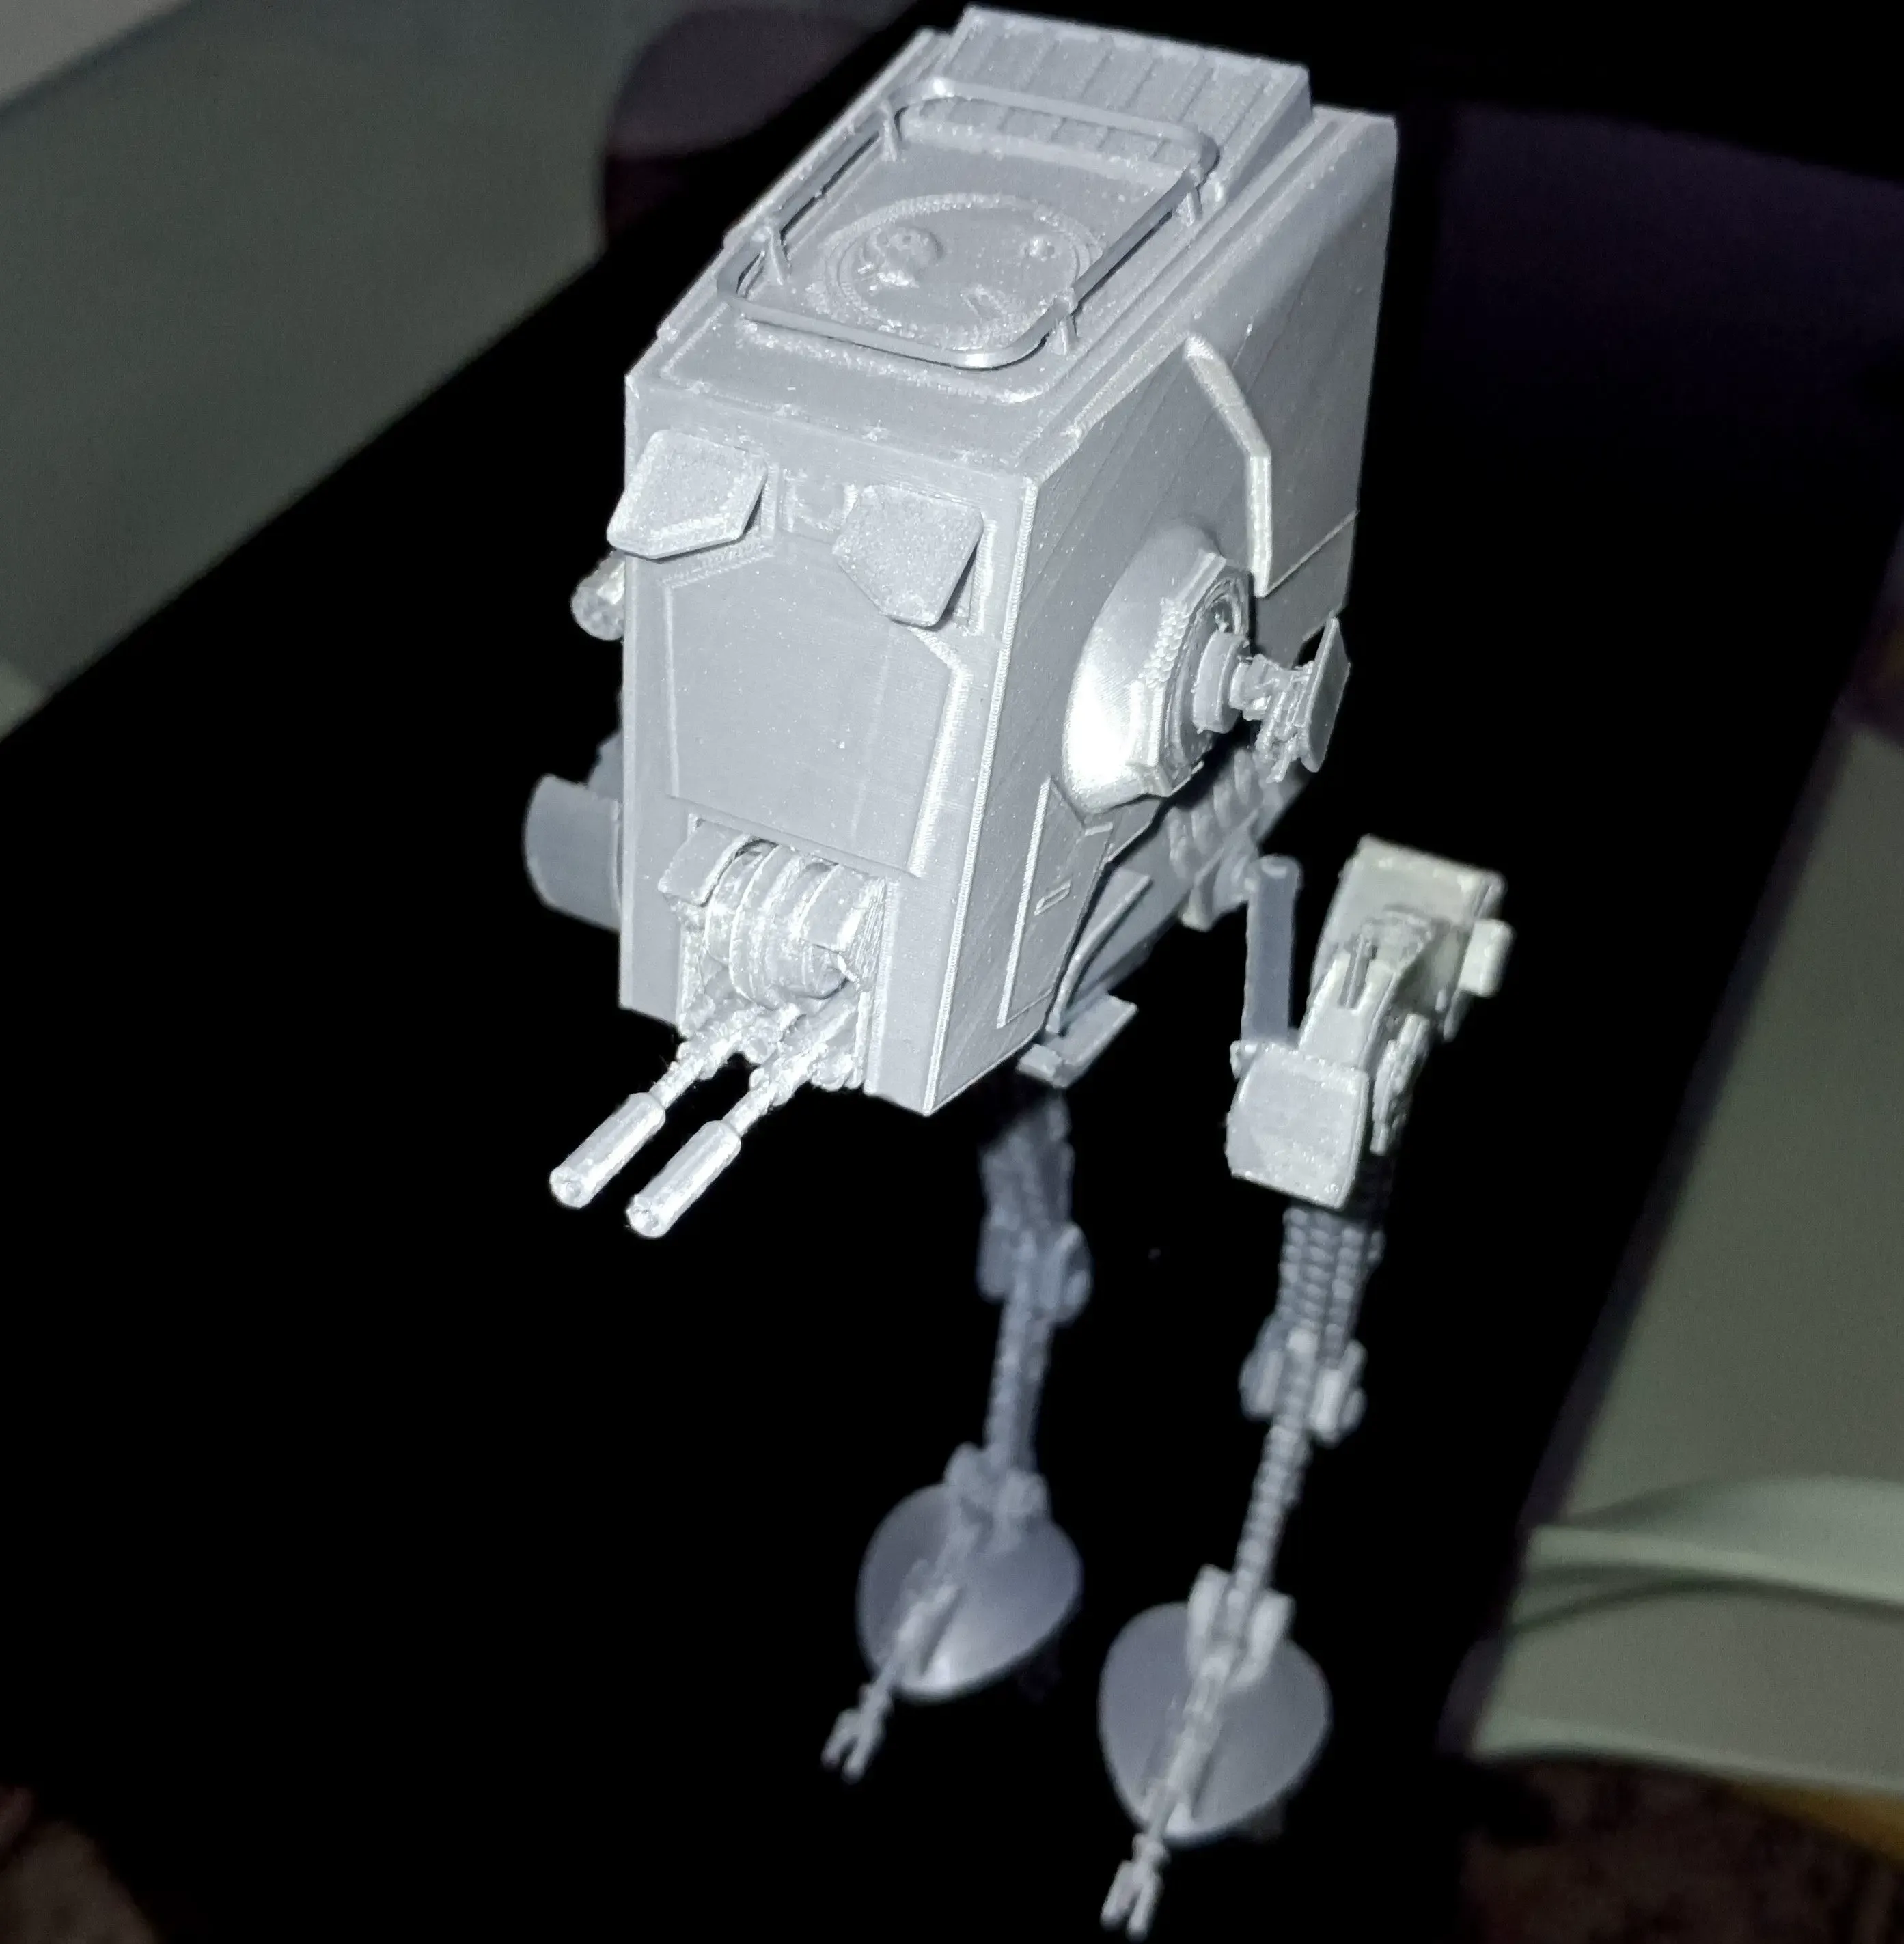 IMPERIAL AT-ST STAR WARS